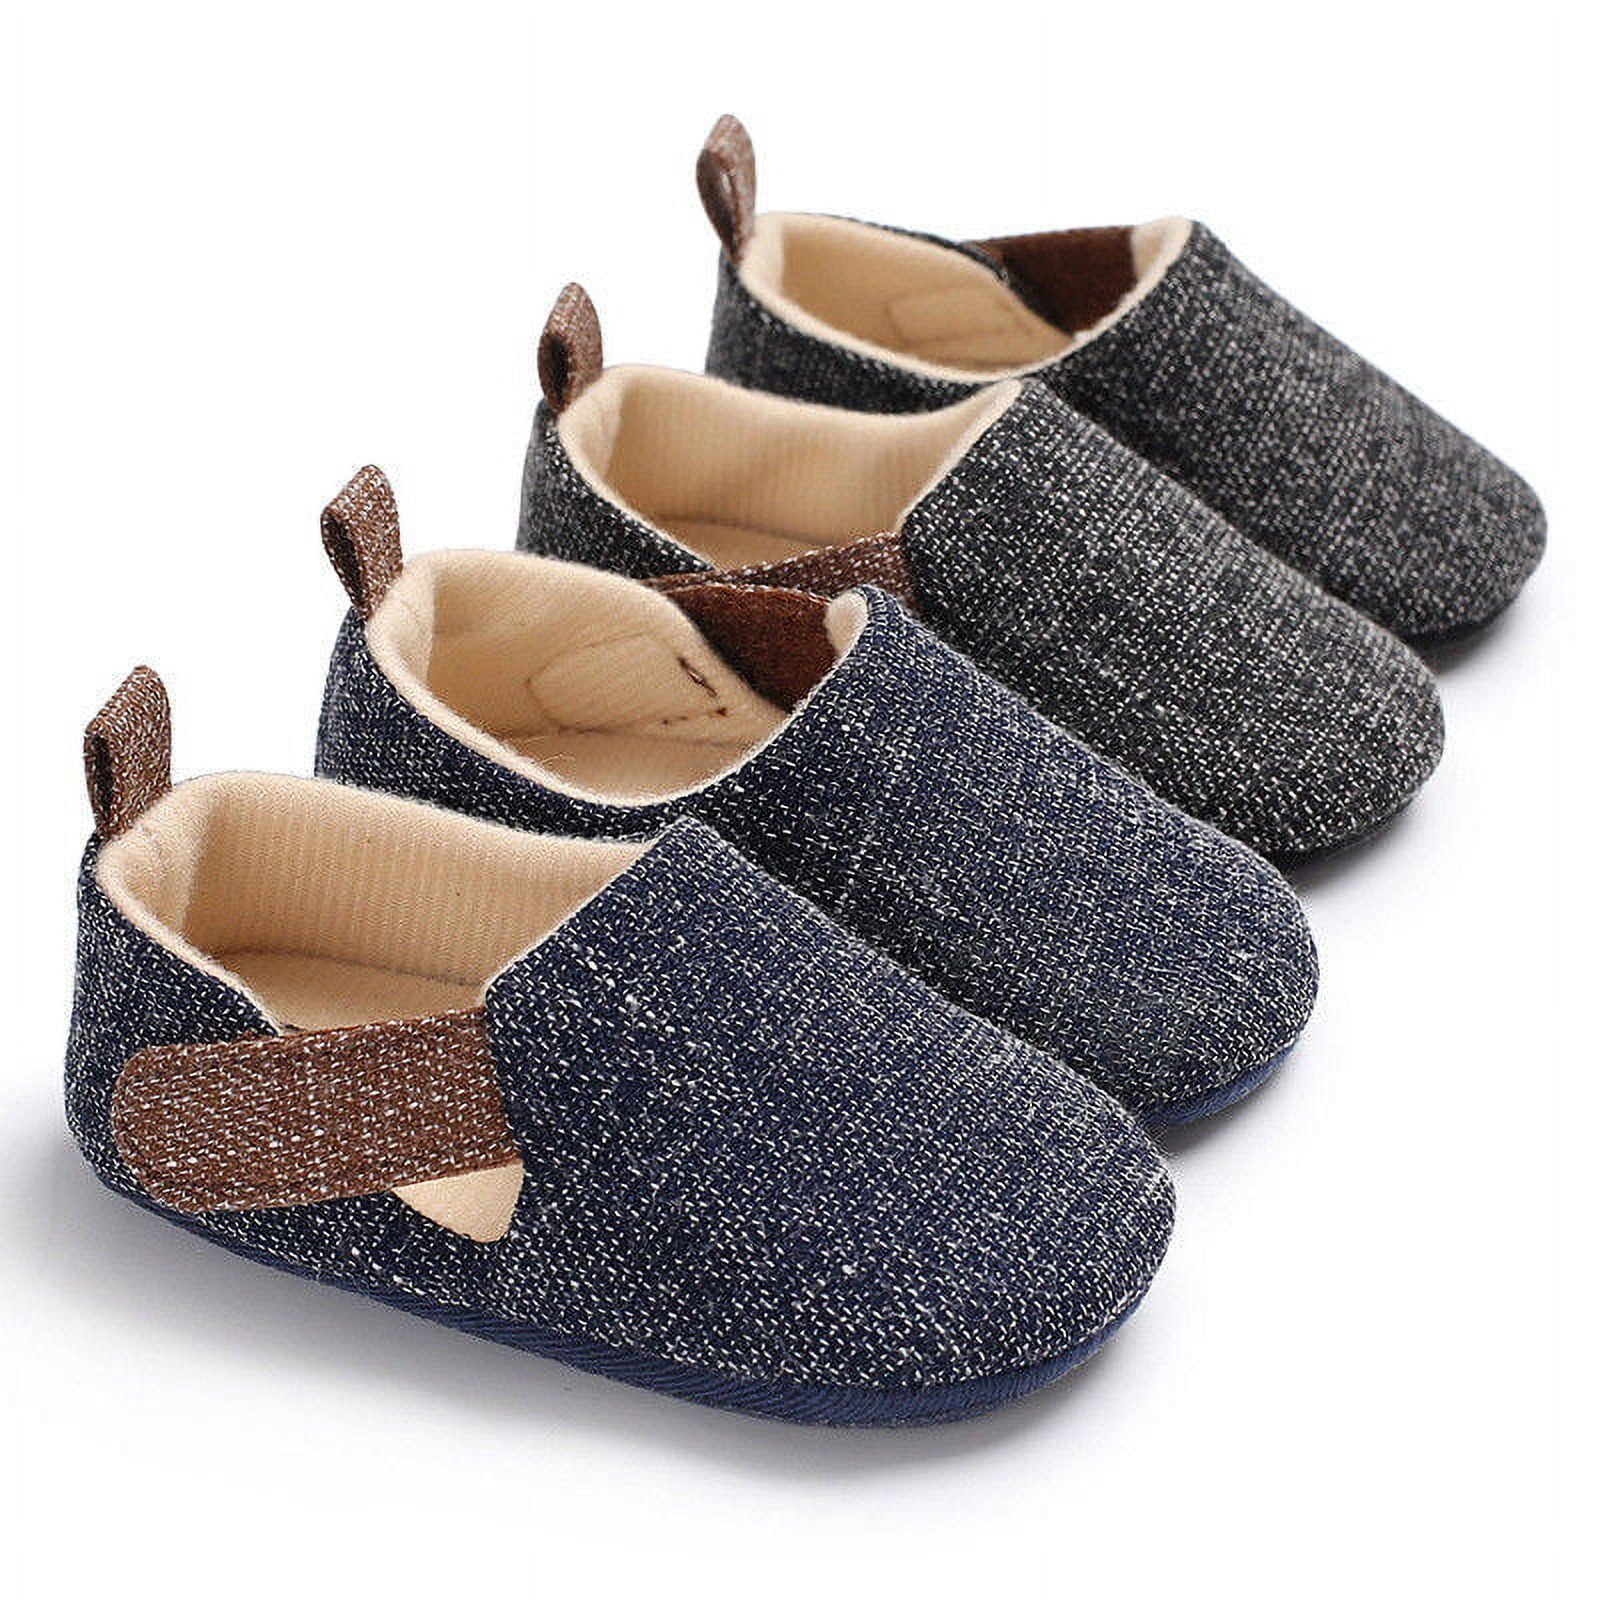 Dropship Baby Boy Leather Shoes Toddlers Kids Flats Slip-on